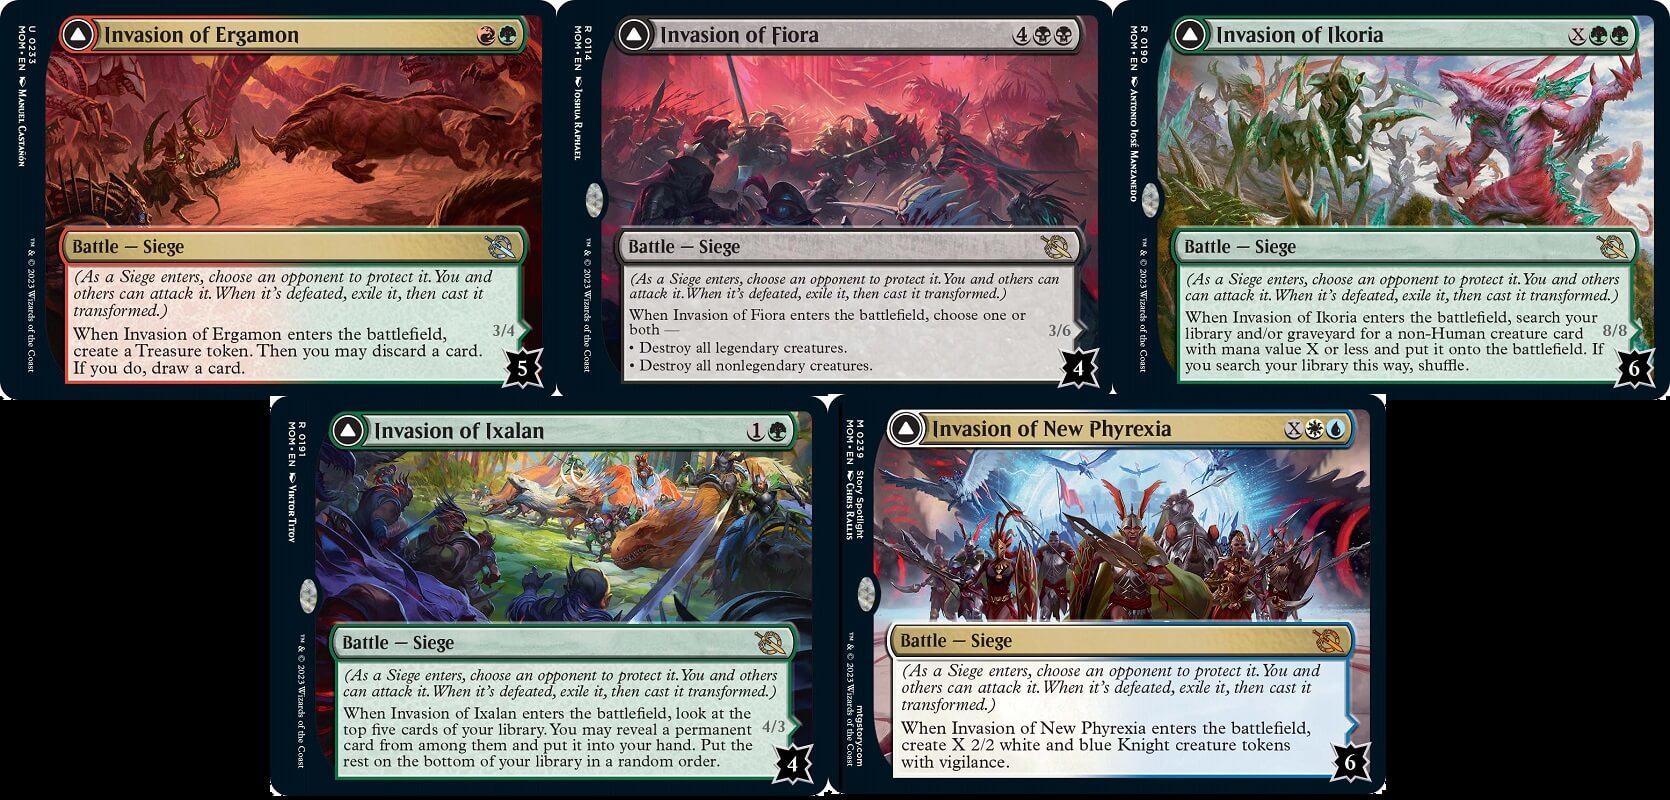 A picture showing 5 battle cards from March of the Machine for Invasion of Egamon, Invasion of Fiora, Invasion of Ikoria, Invasion of Ixalan, and Invasion of New Phyrexia